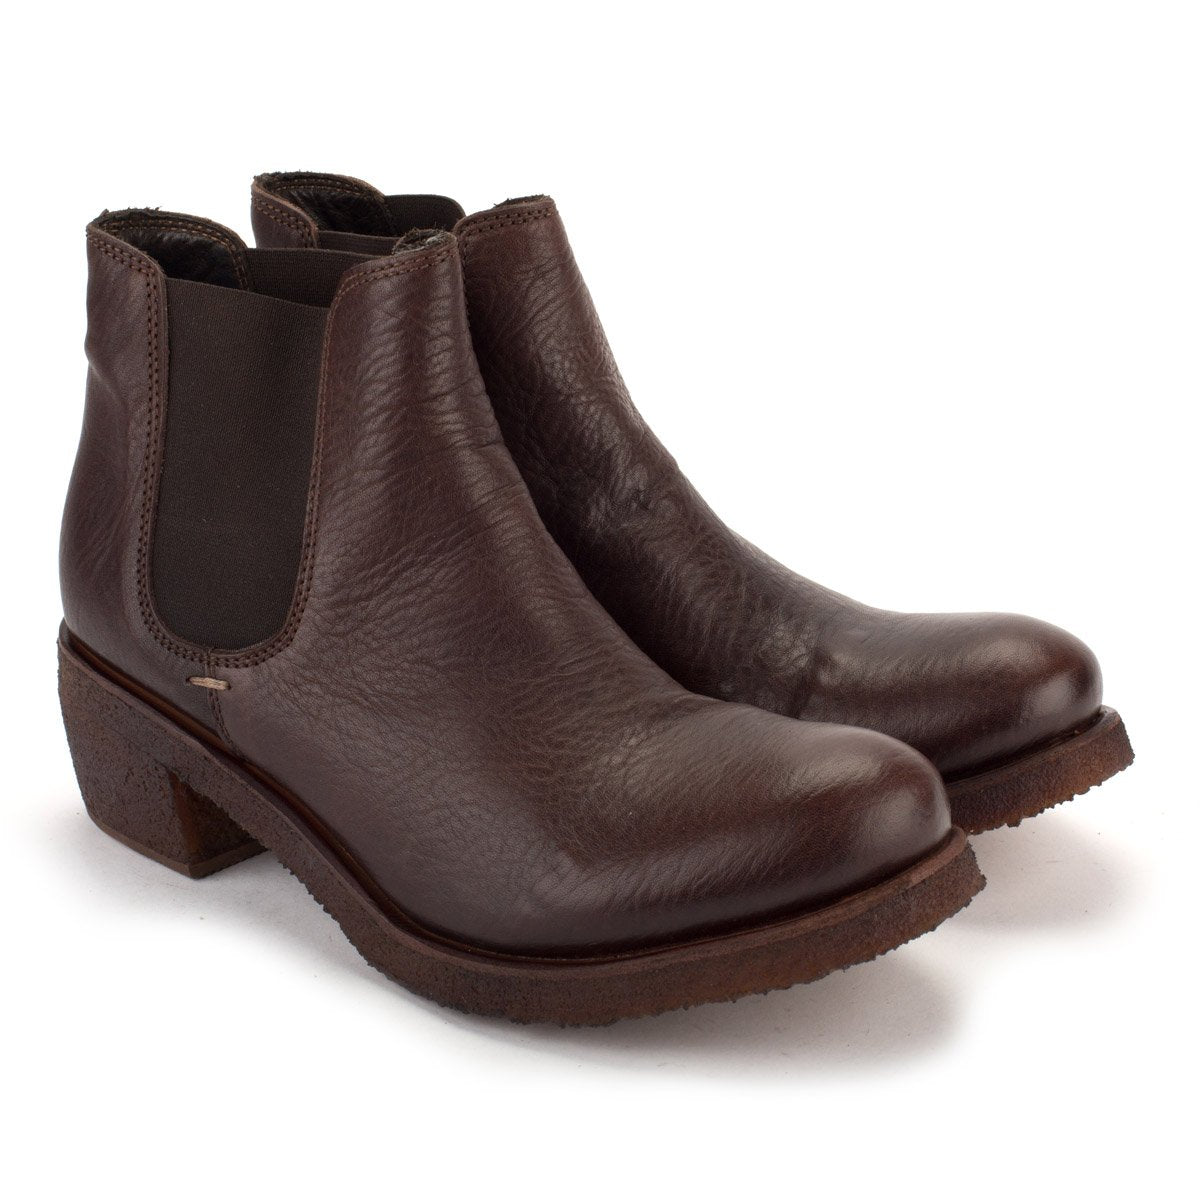 TEXAS02 CHELSEA BOOTS – Coffe